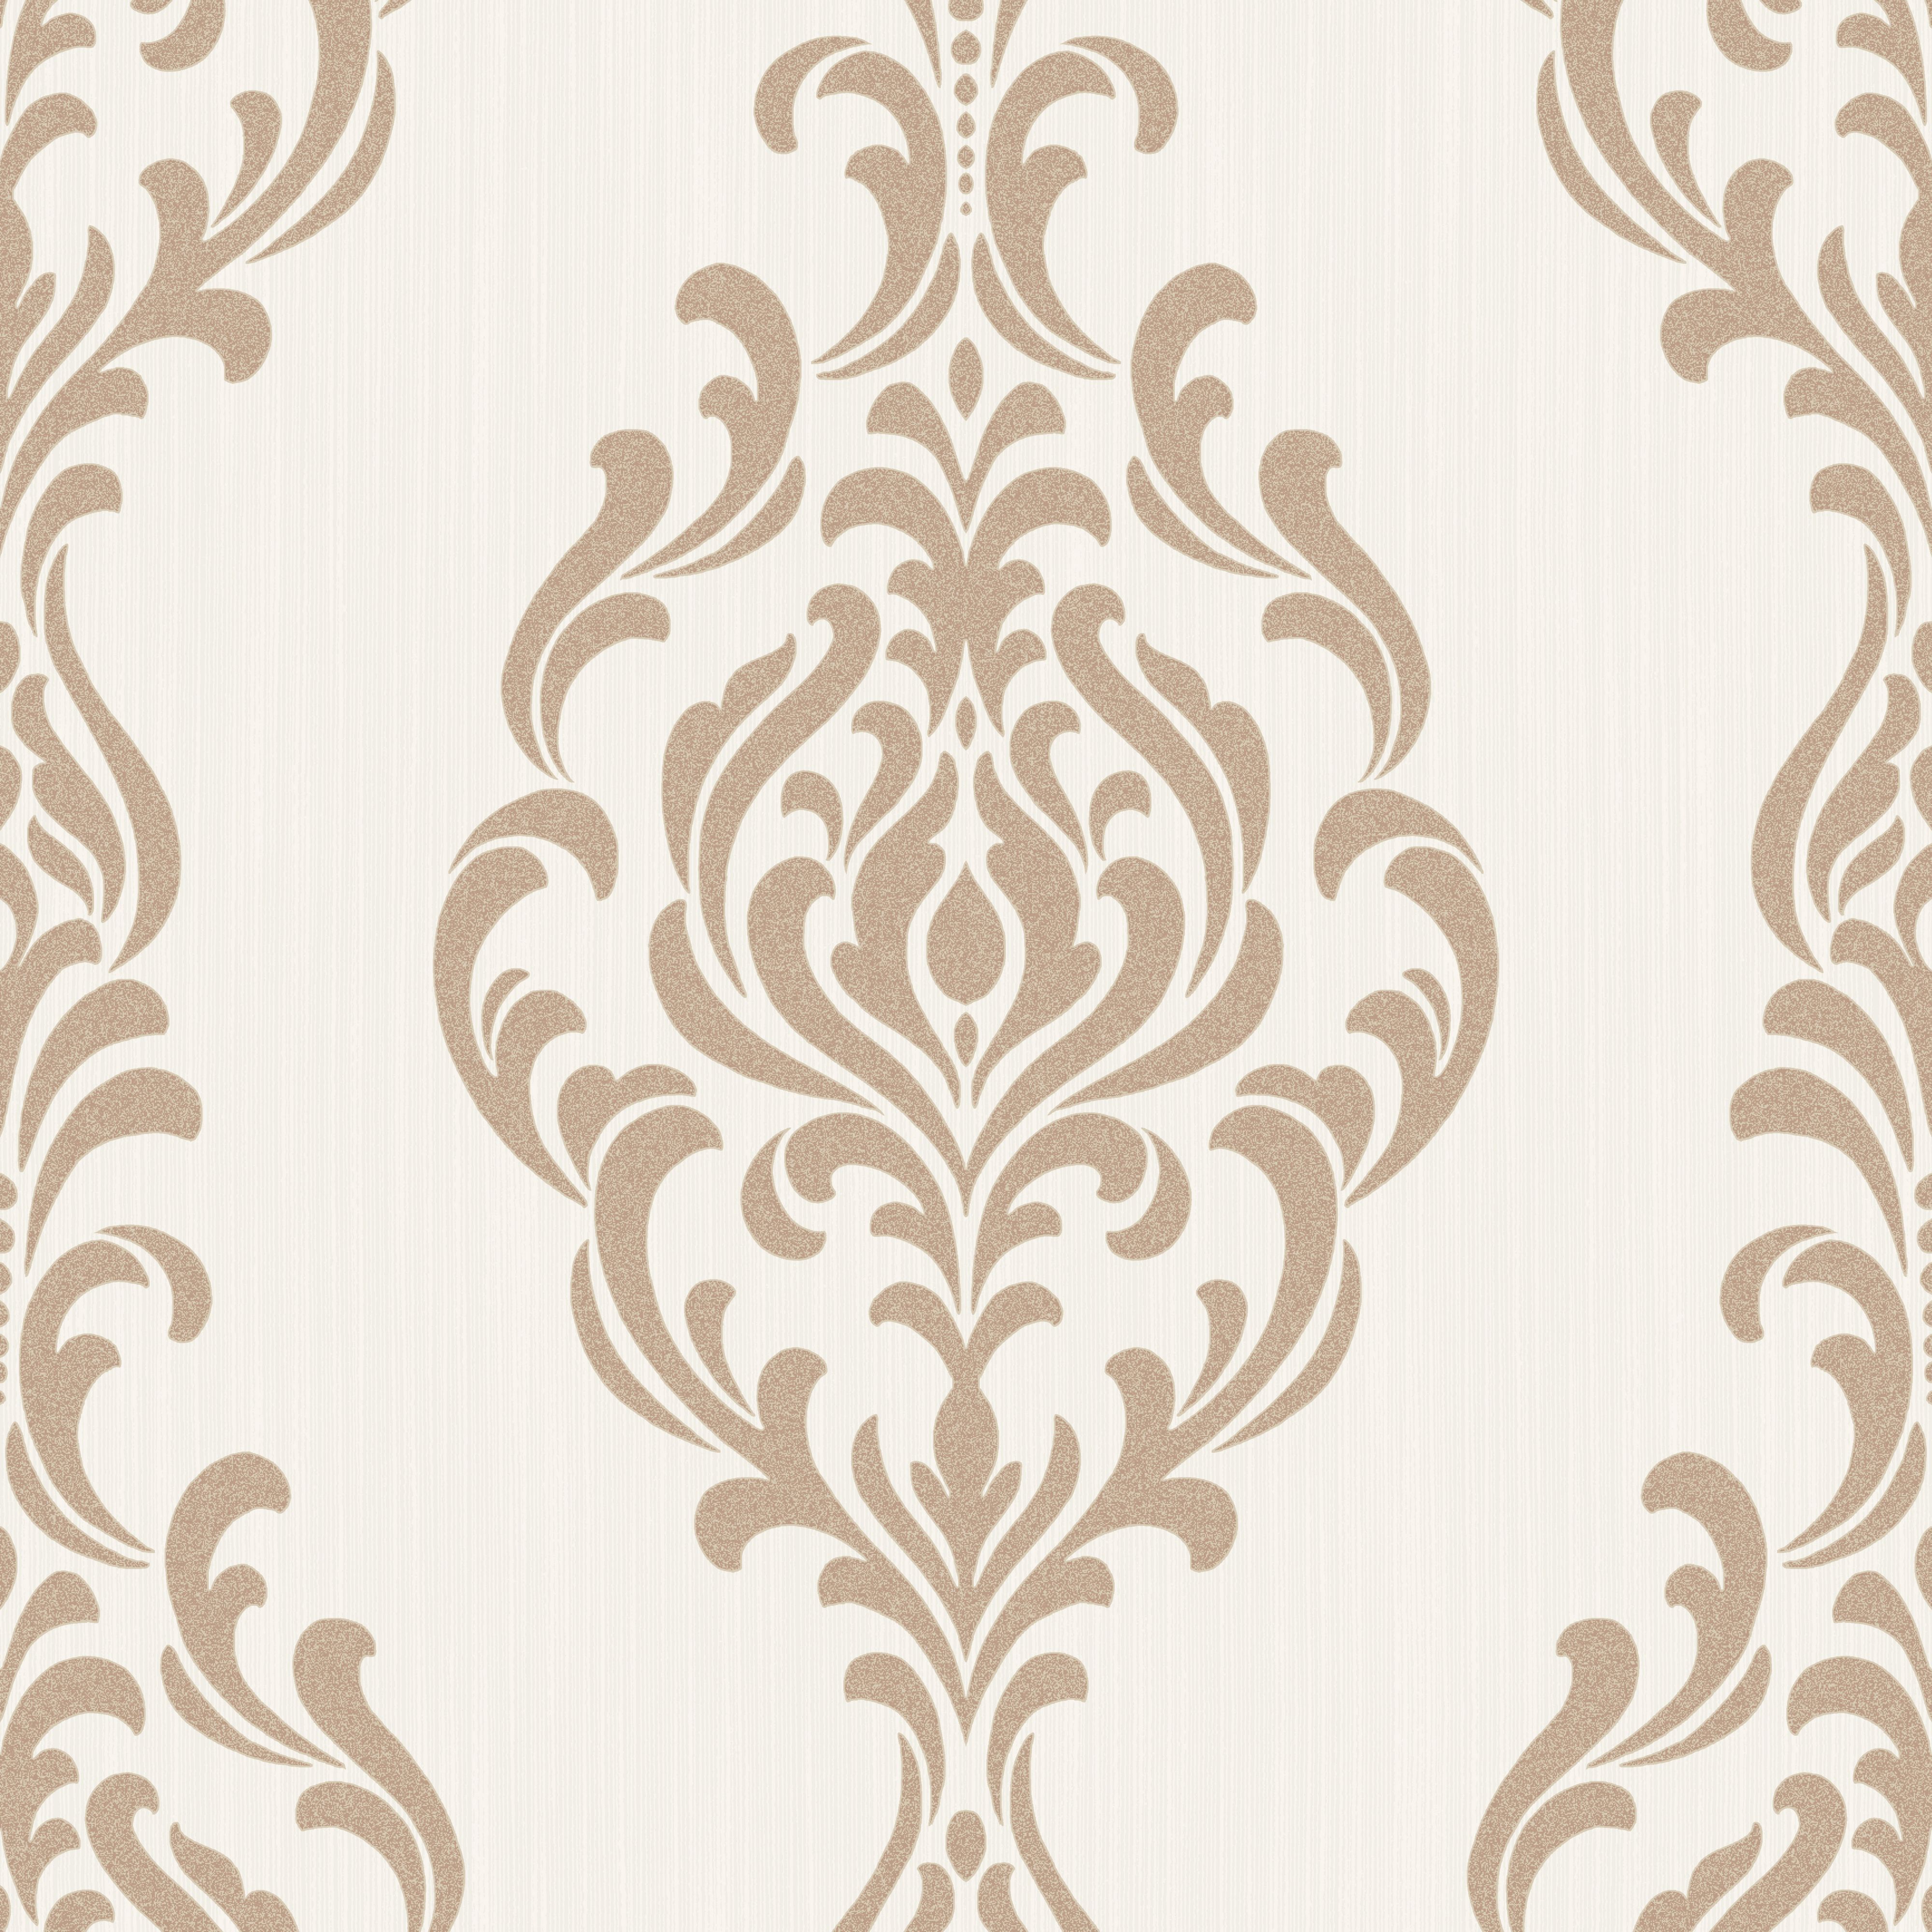 Cream And Brown Damask - HD Wallpaper 